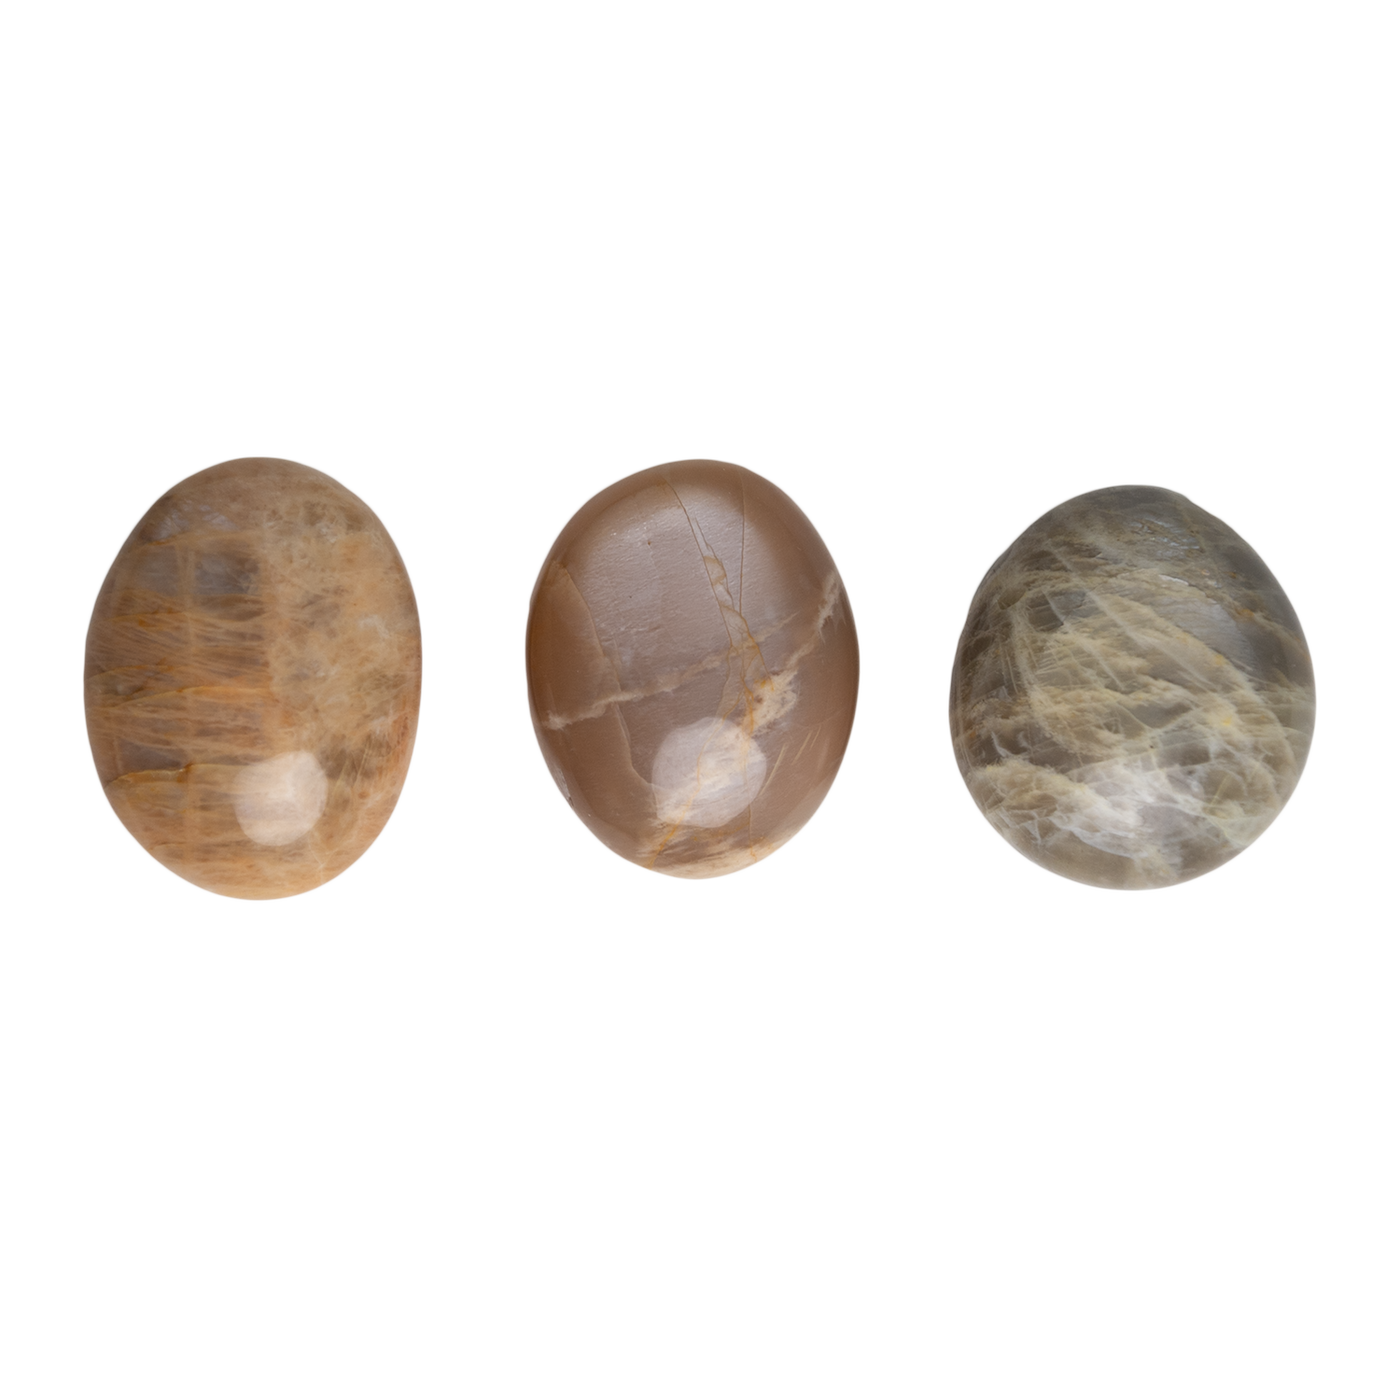 variety shot of 3 polished Peach Moonstone touchstones illustrating variety of coloring, patterns, and size by Energy Muse